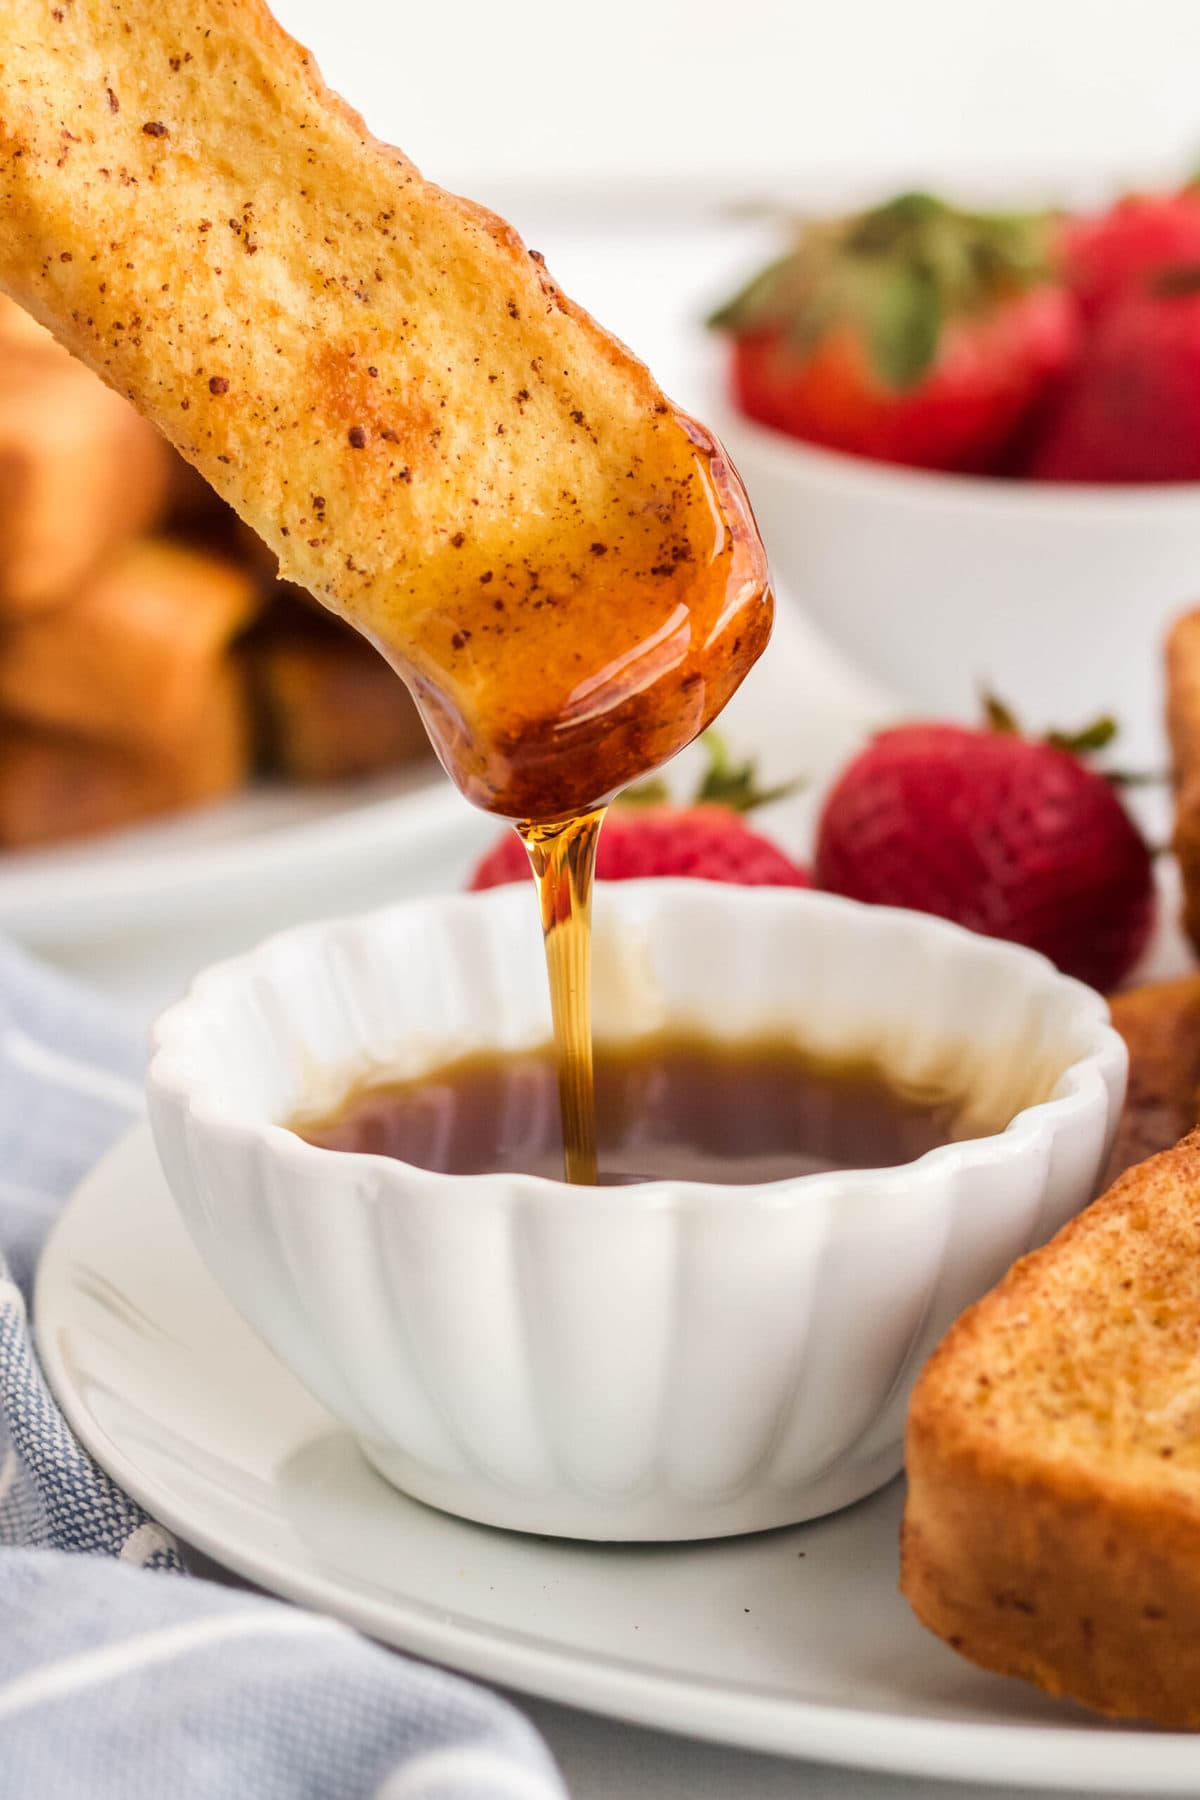 french toast dipped in syrup, strawberries, white dishes